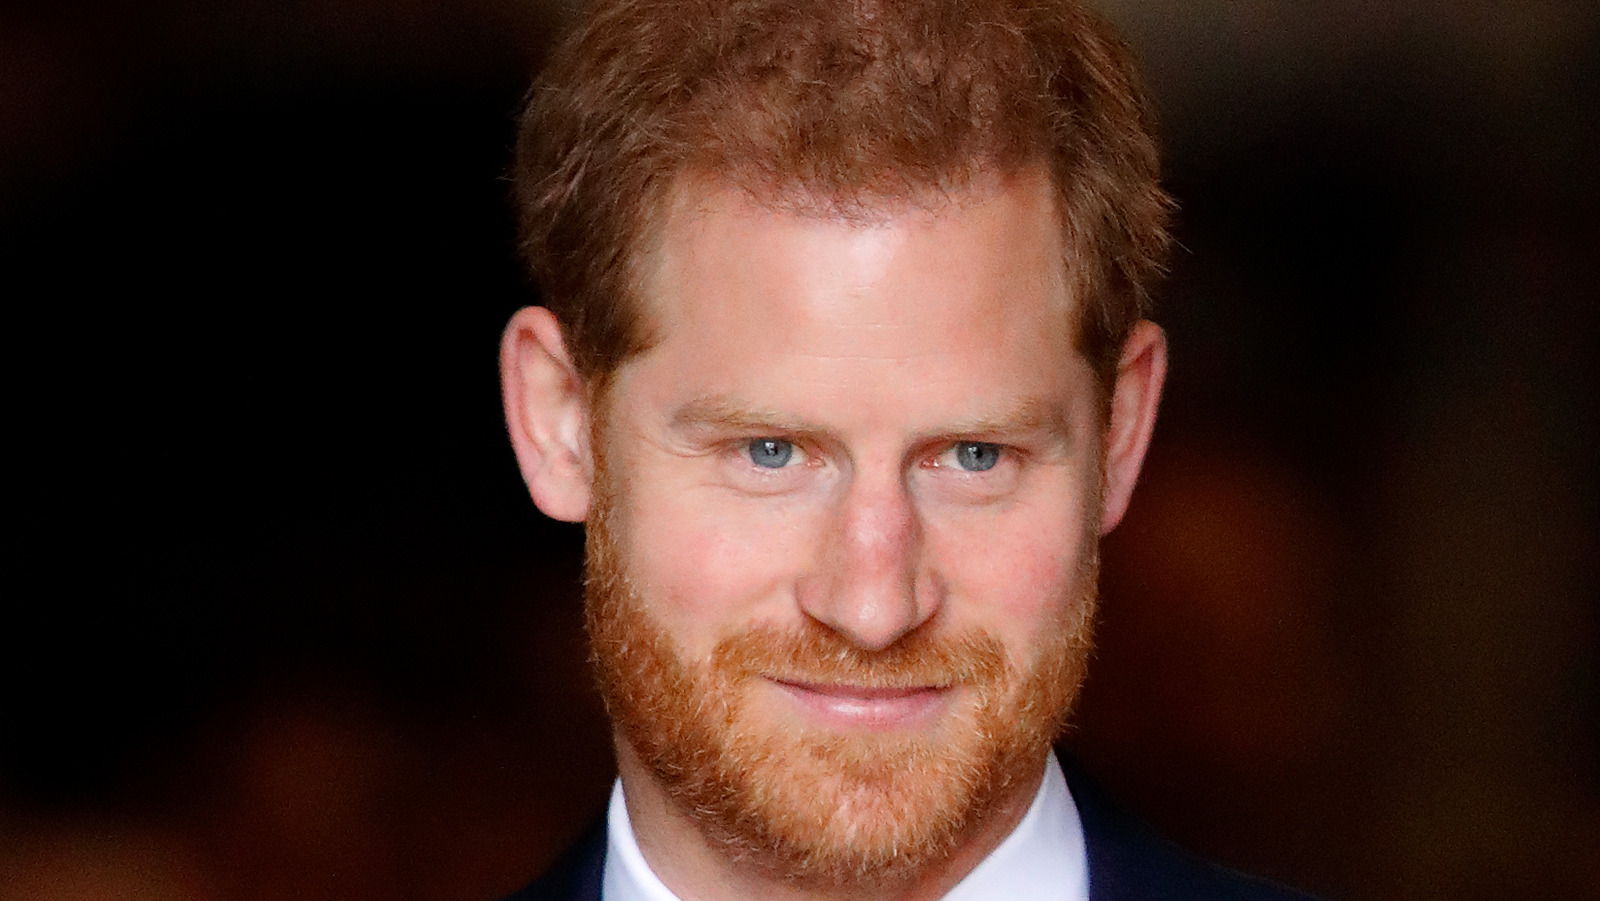 Strange Facts About Prince Harry